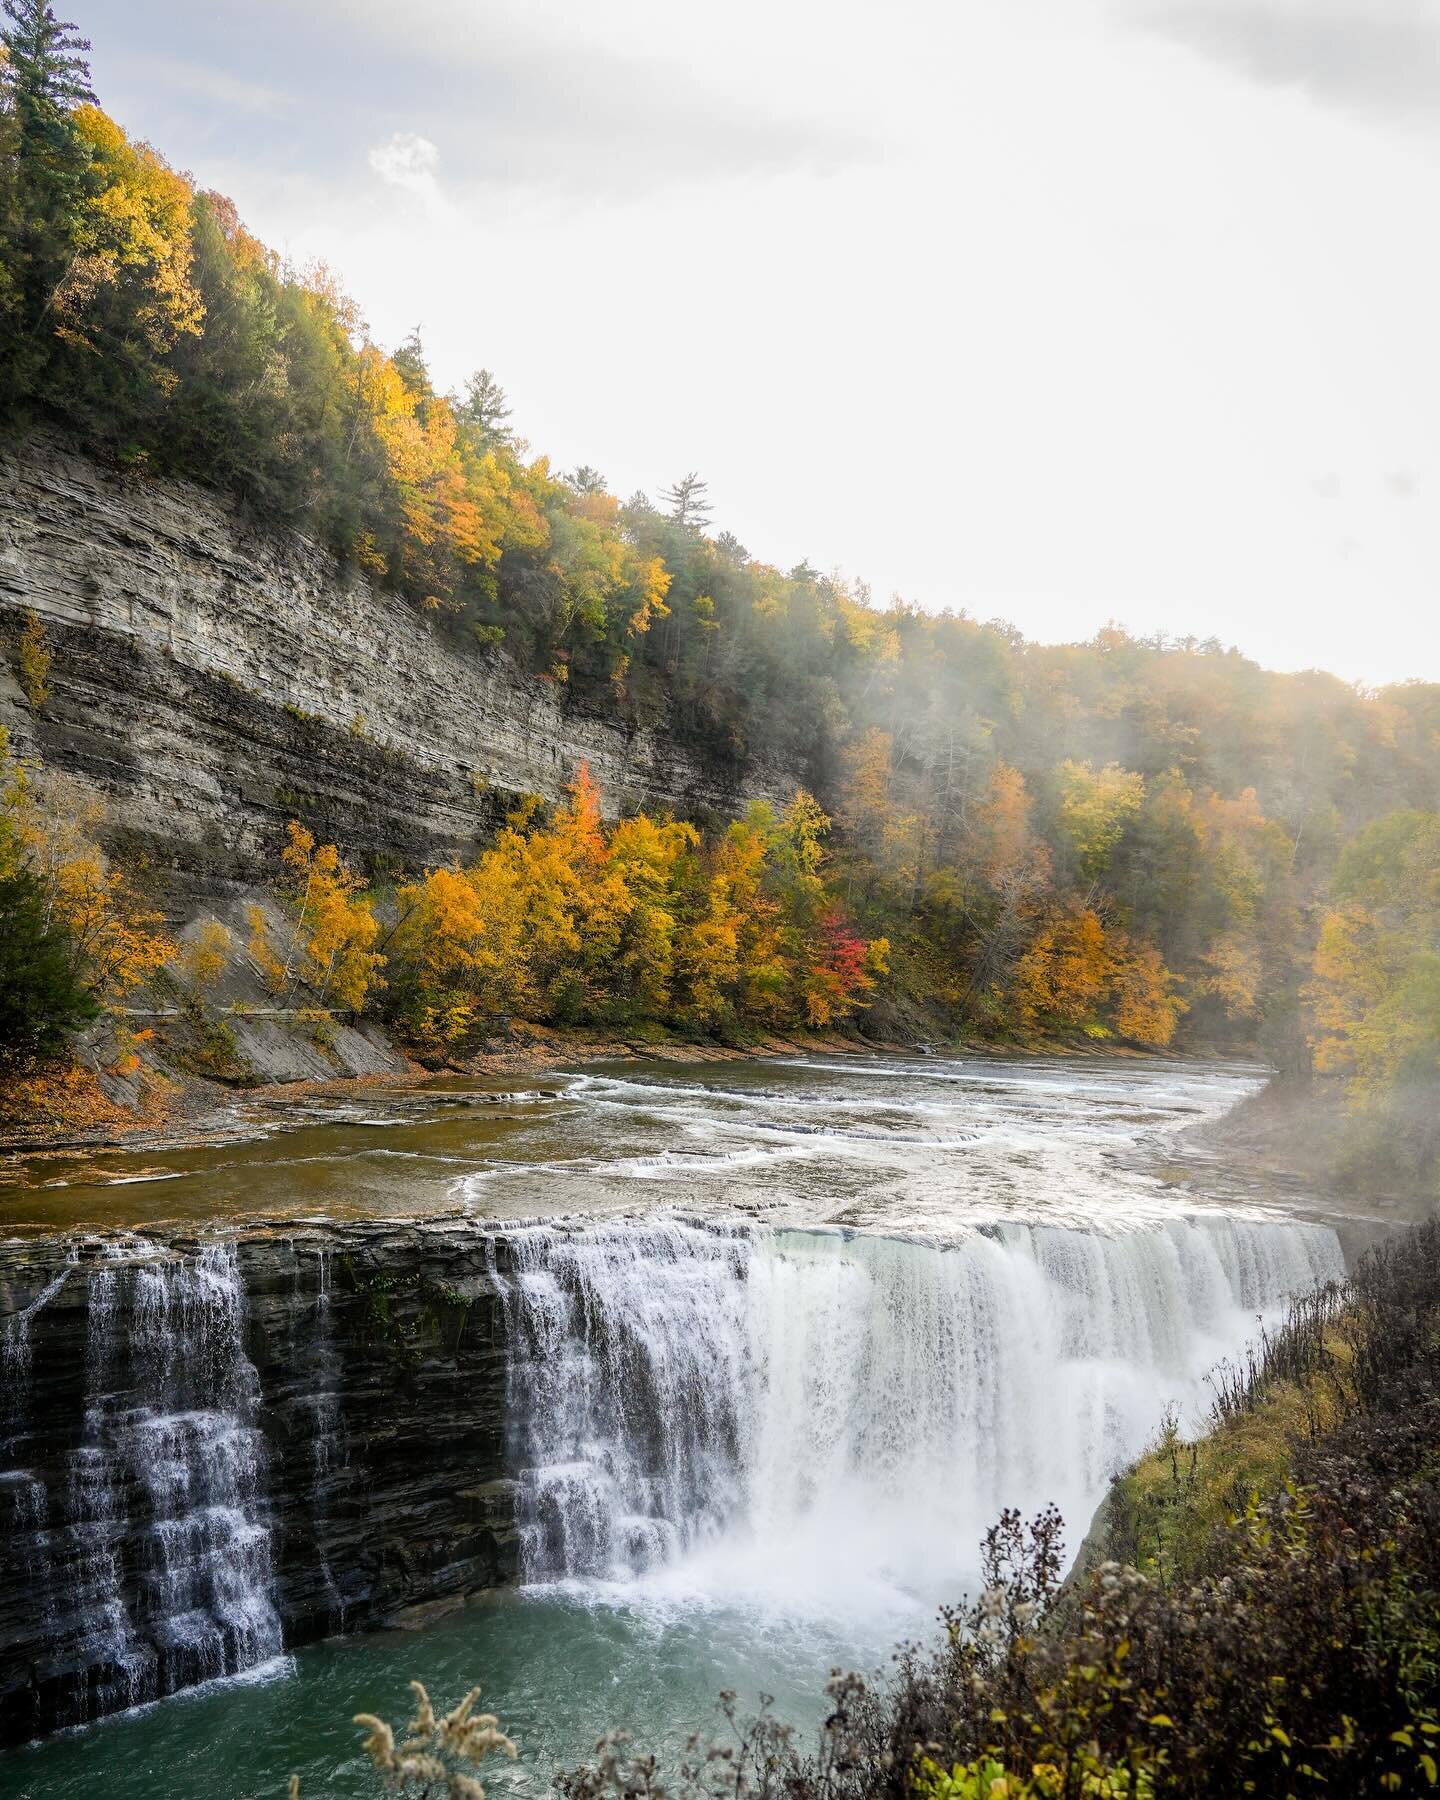 Another pic from Letchworth of their lower falls. Can&rsquo;t wait to visit again! #newyork #ny #naturephotography #nature #waterfall #waterfalls #waterfallwednesday #landscape #landscapephotography #photo #fallcolors #fall #hdr #sony #sonyalpha #📸